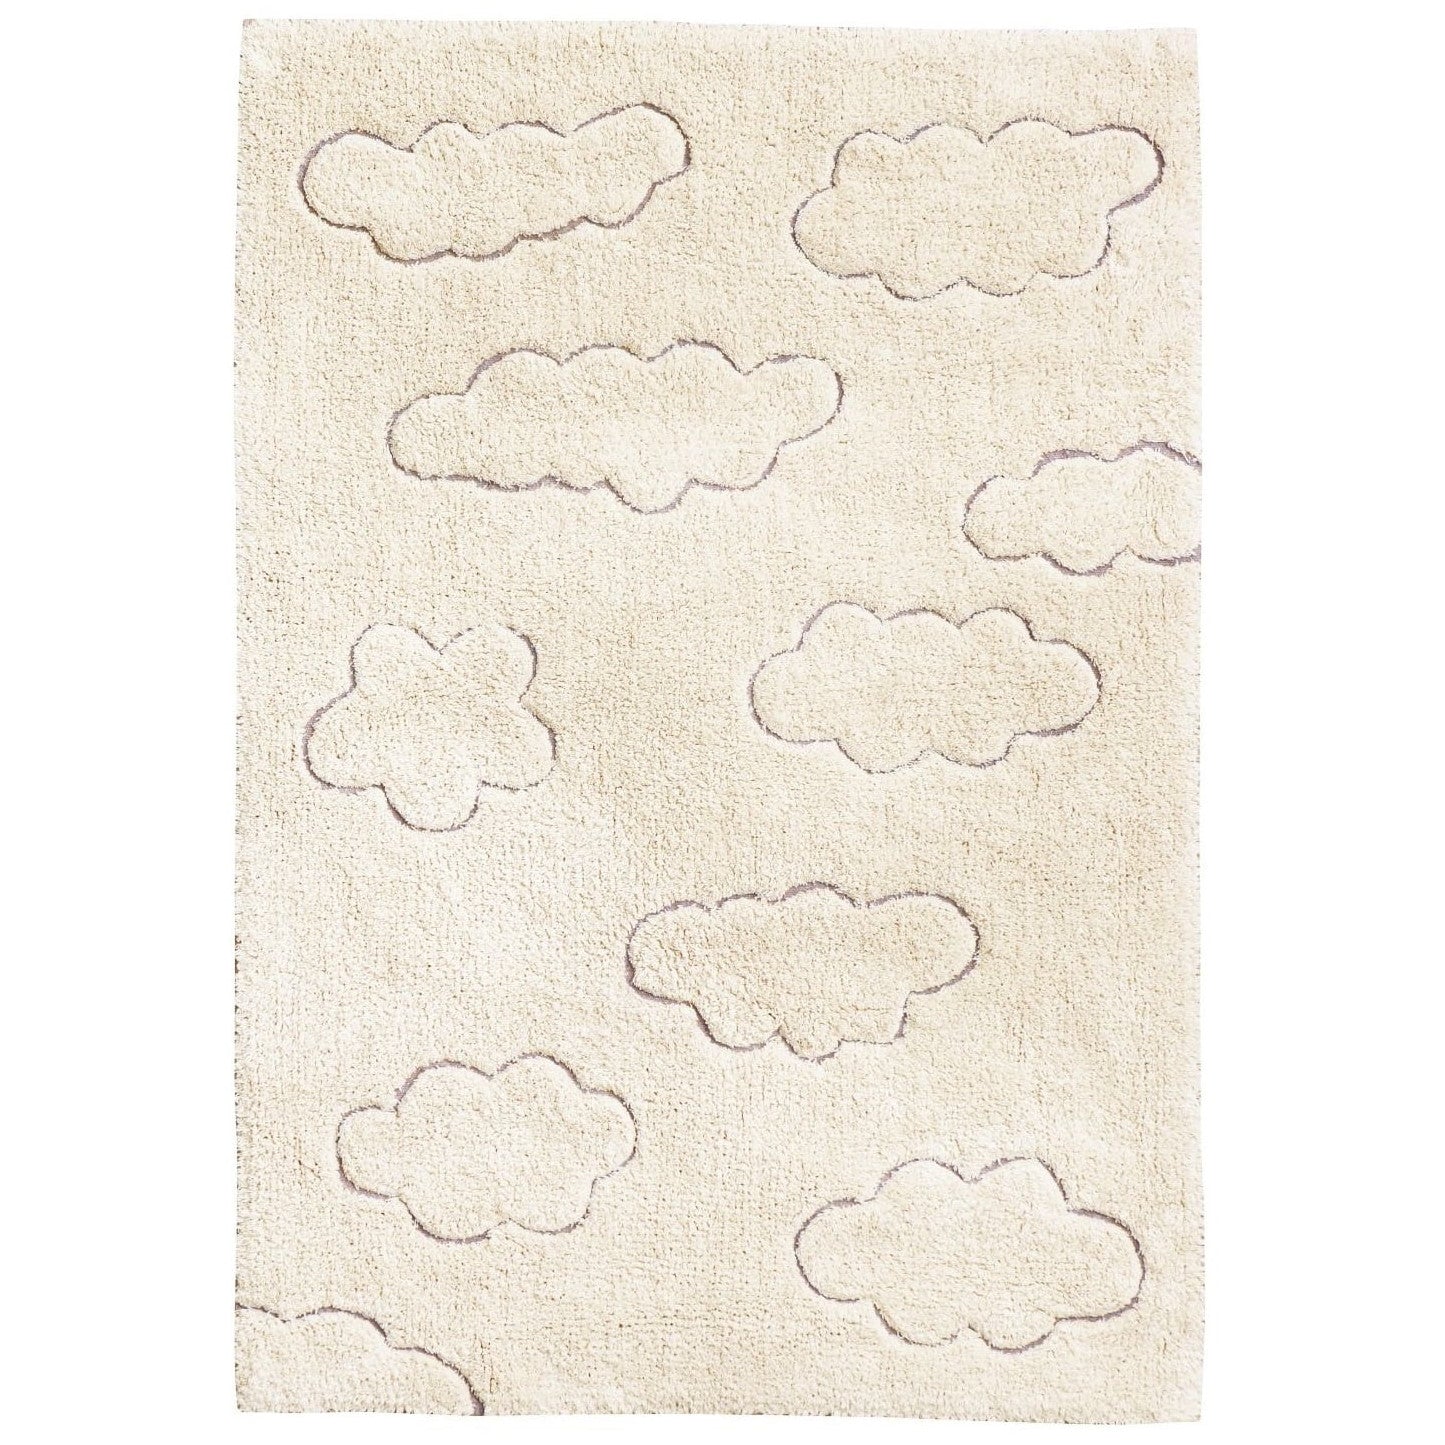 Tapis lavable Lorena Canals Cycled Clouds, trois tailles